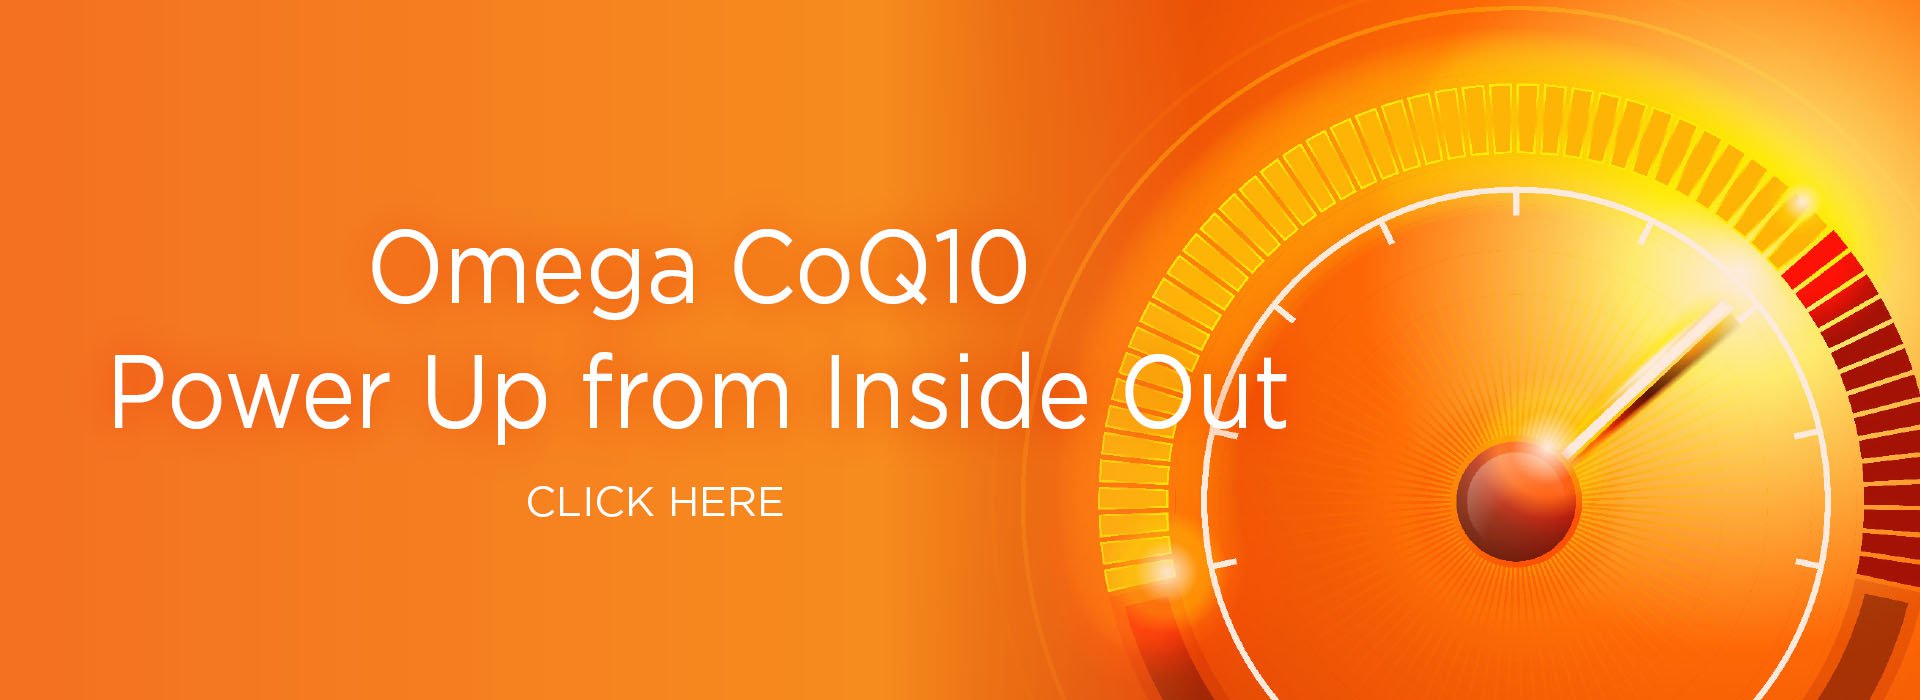 New Image International:Omega CoQ10 Power Up from Inside Out